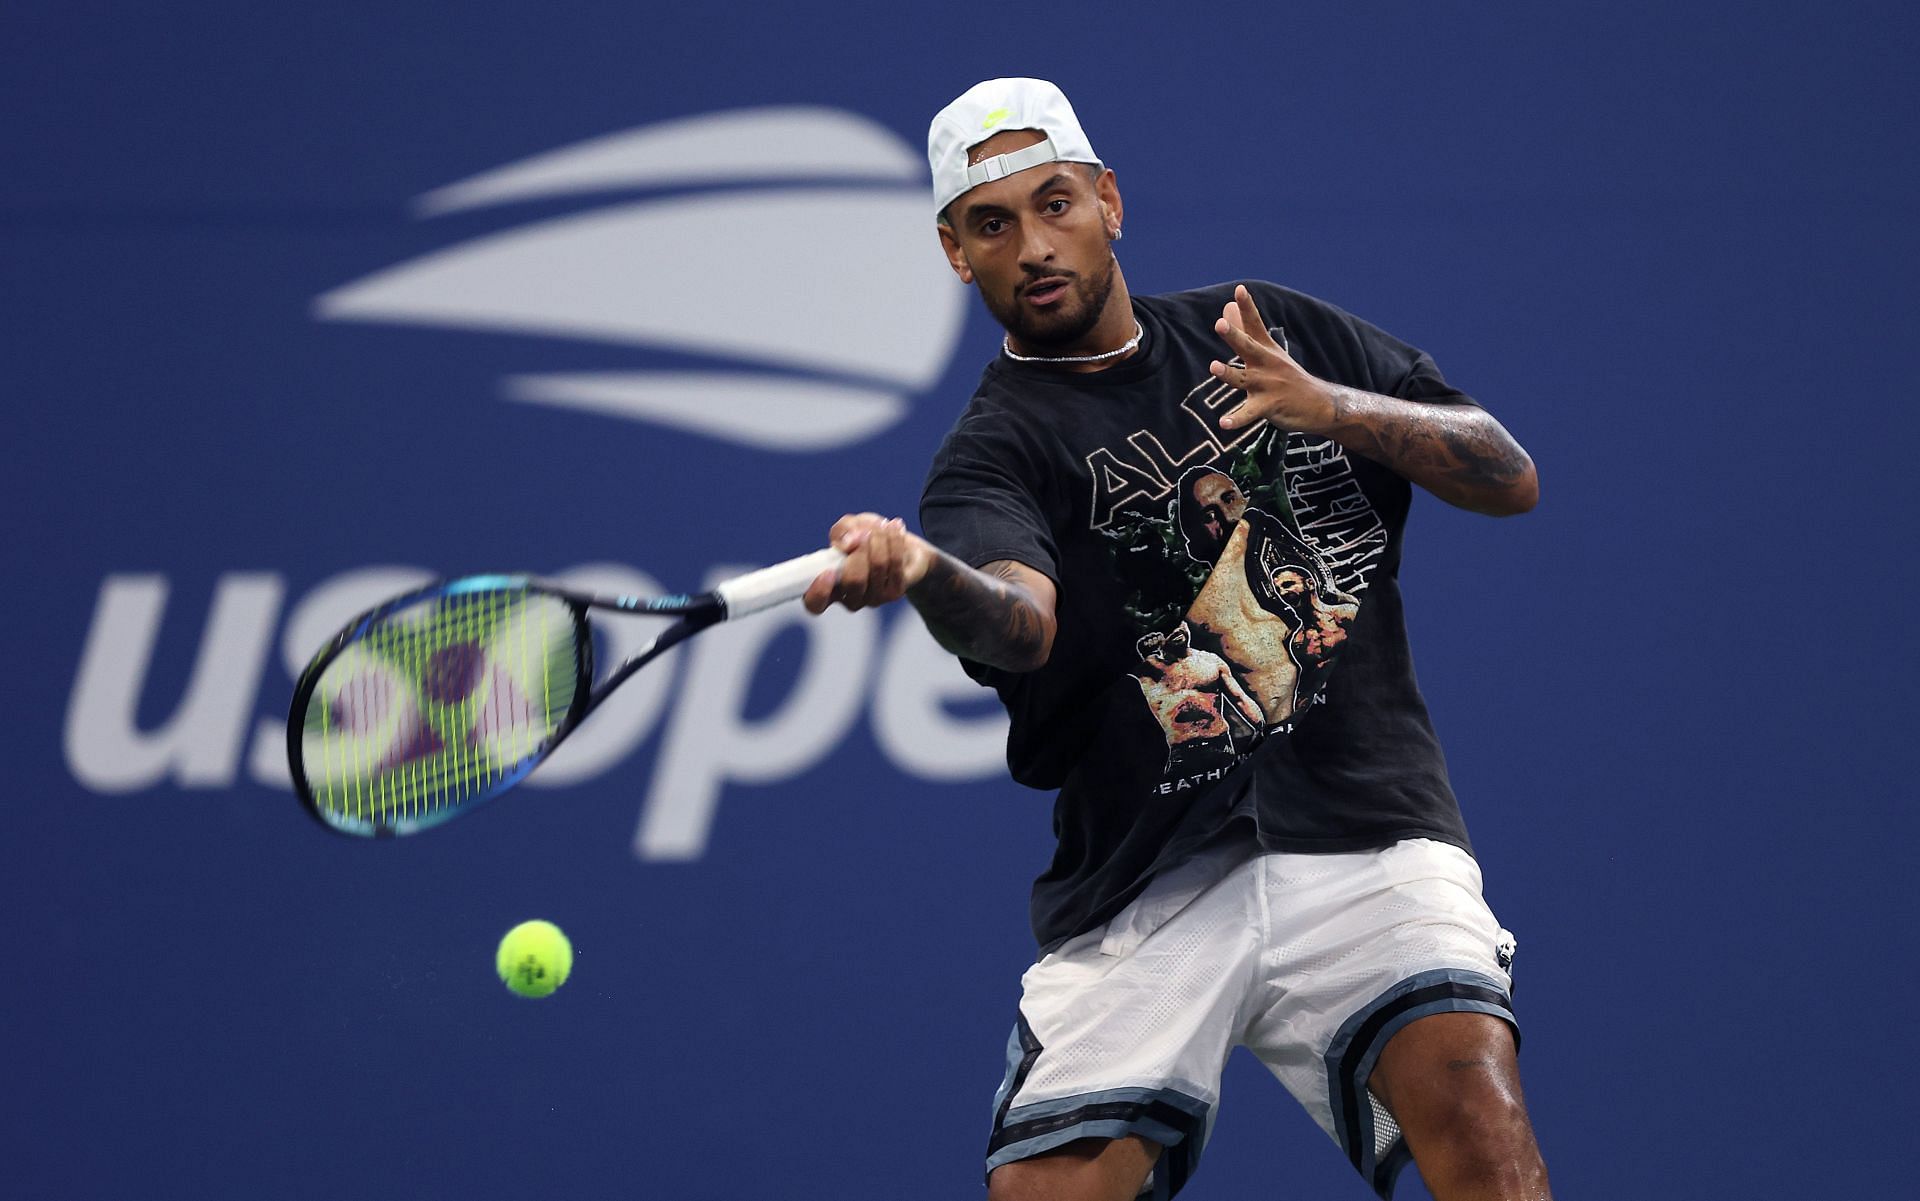 Nick Kyrgios of Australia in a practice session at the 2022 US Open - Previews